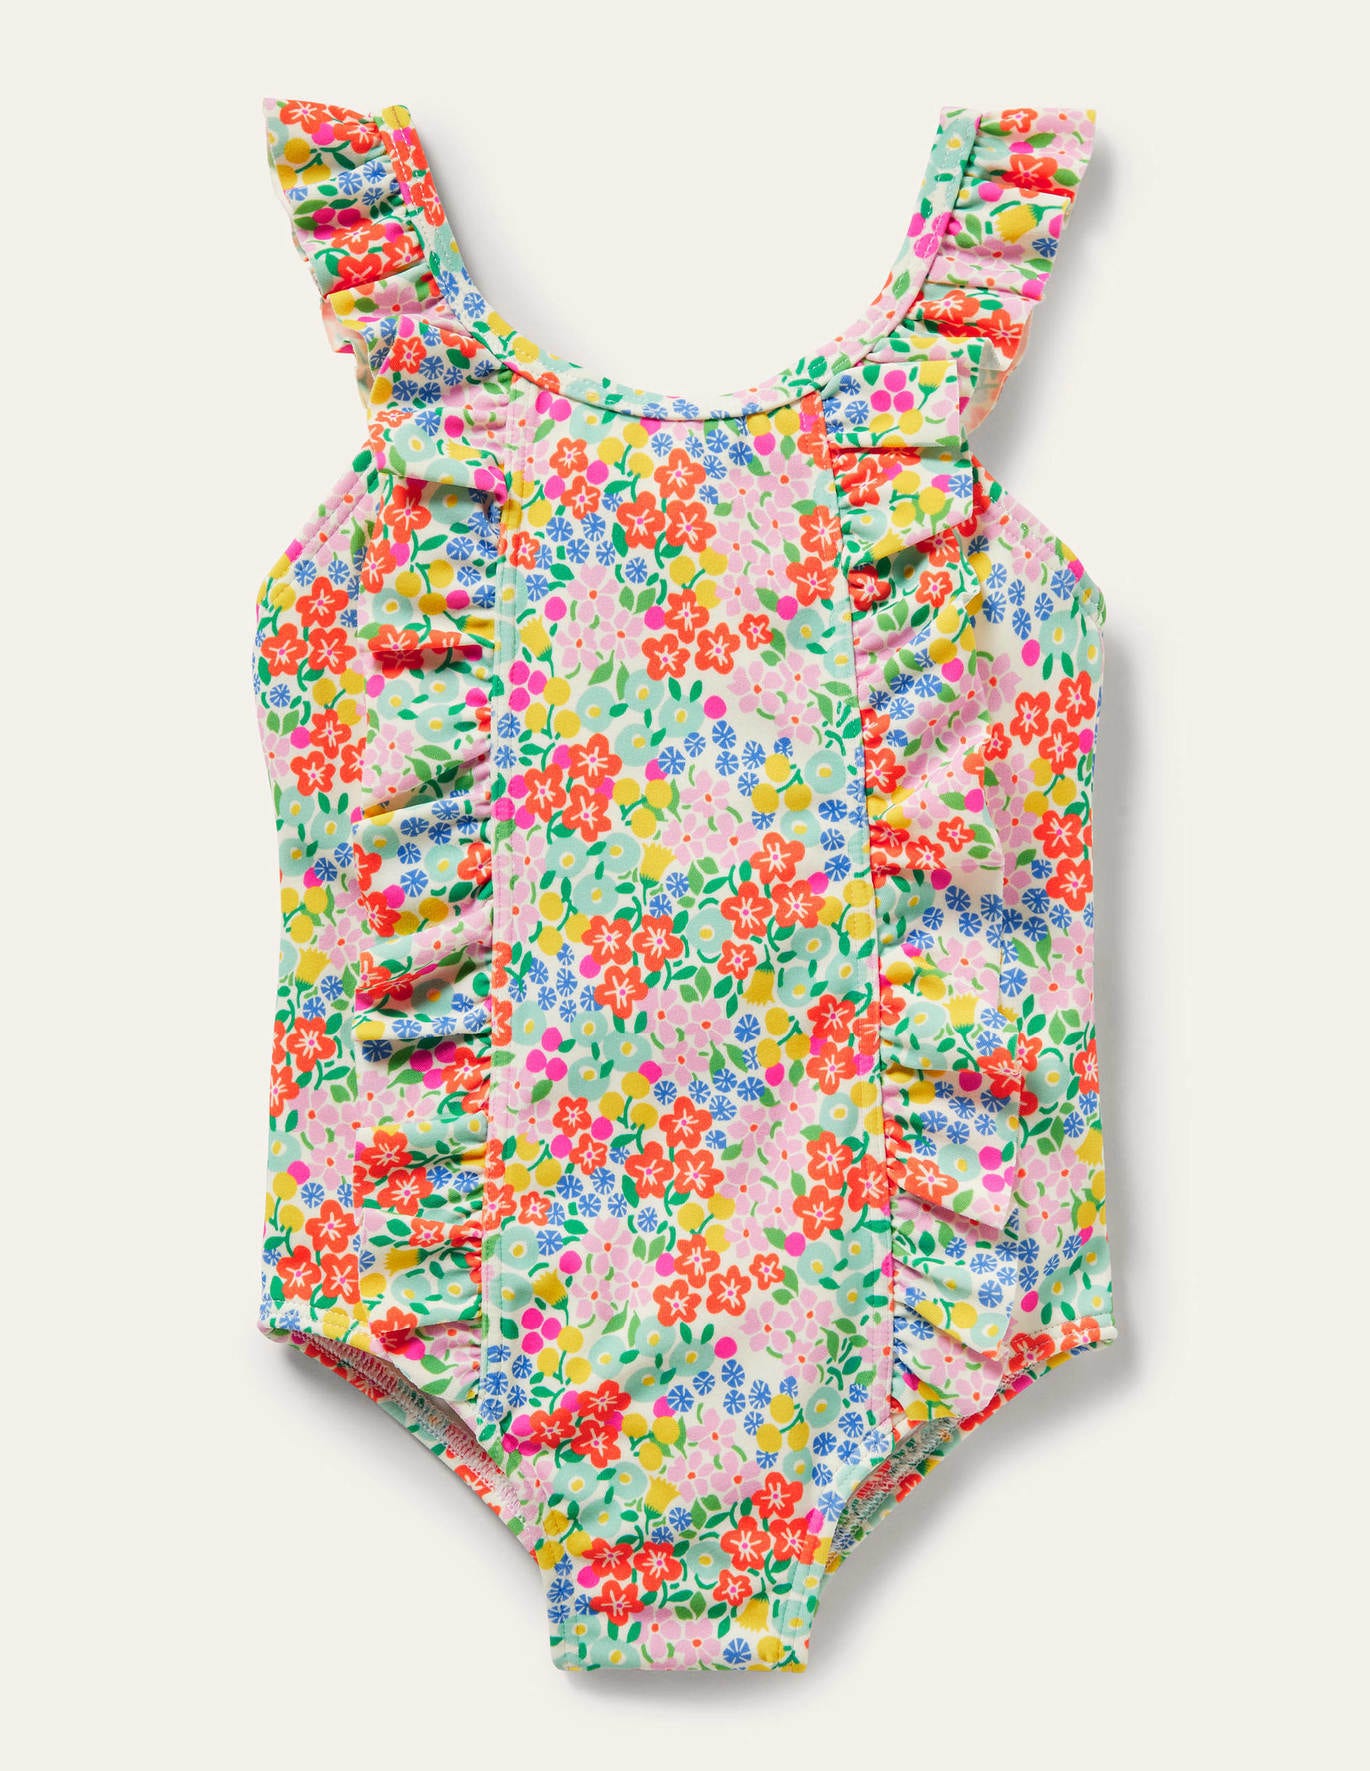 Boden Bow Back Swimsuit - Sweetcorn Tropical Flowerbed